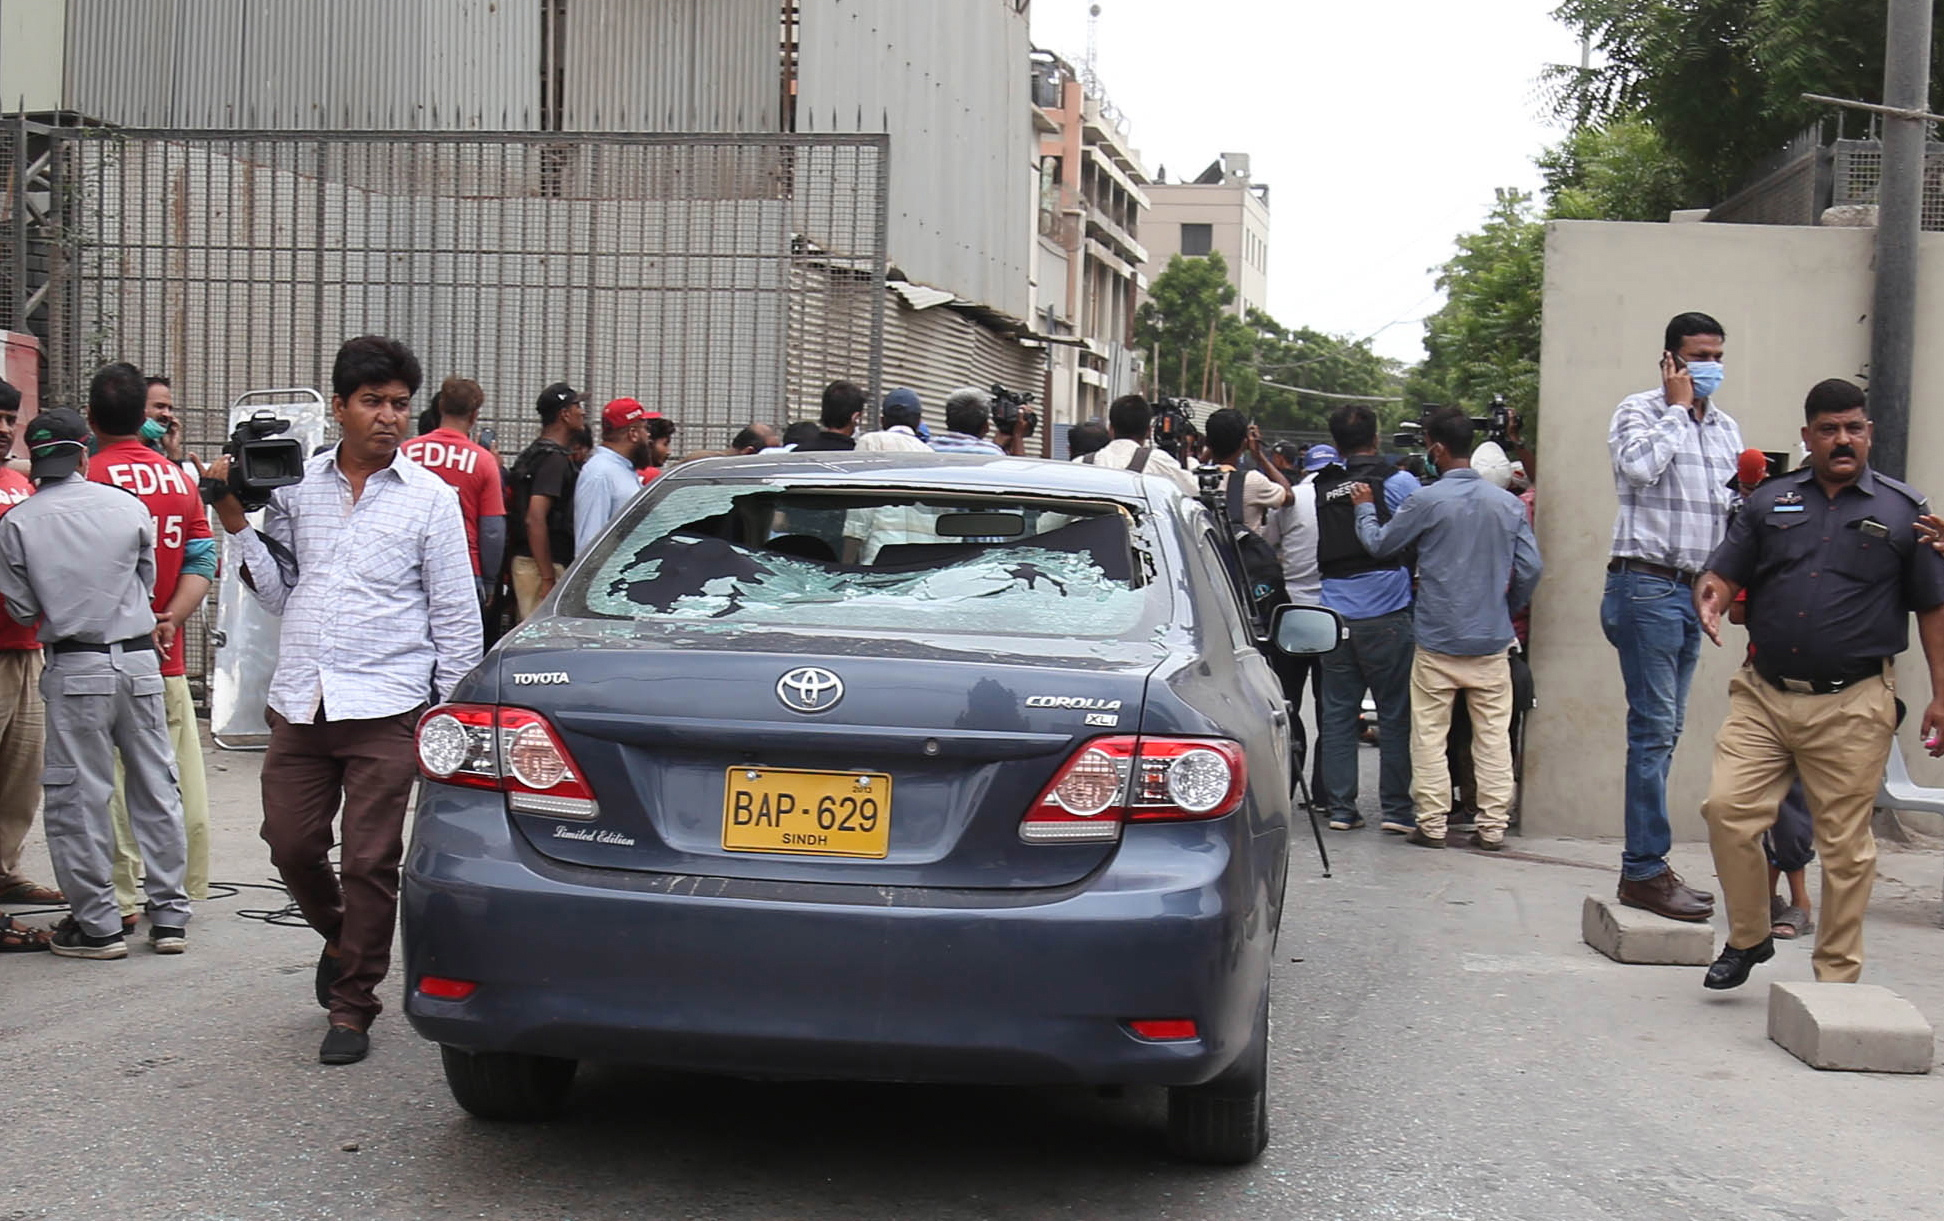 Pakistani security officials inspect the scene of an attack by unknown gunmen at Karachi Stock Exchange in Karachi, Pakistan, 29 June 2020. At least four gunmen and two civilians were reportedly killed and security forces have cordoned off the area as fighting is currently ongoing